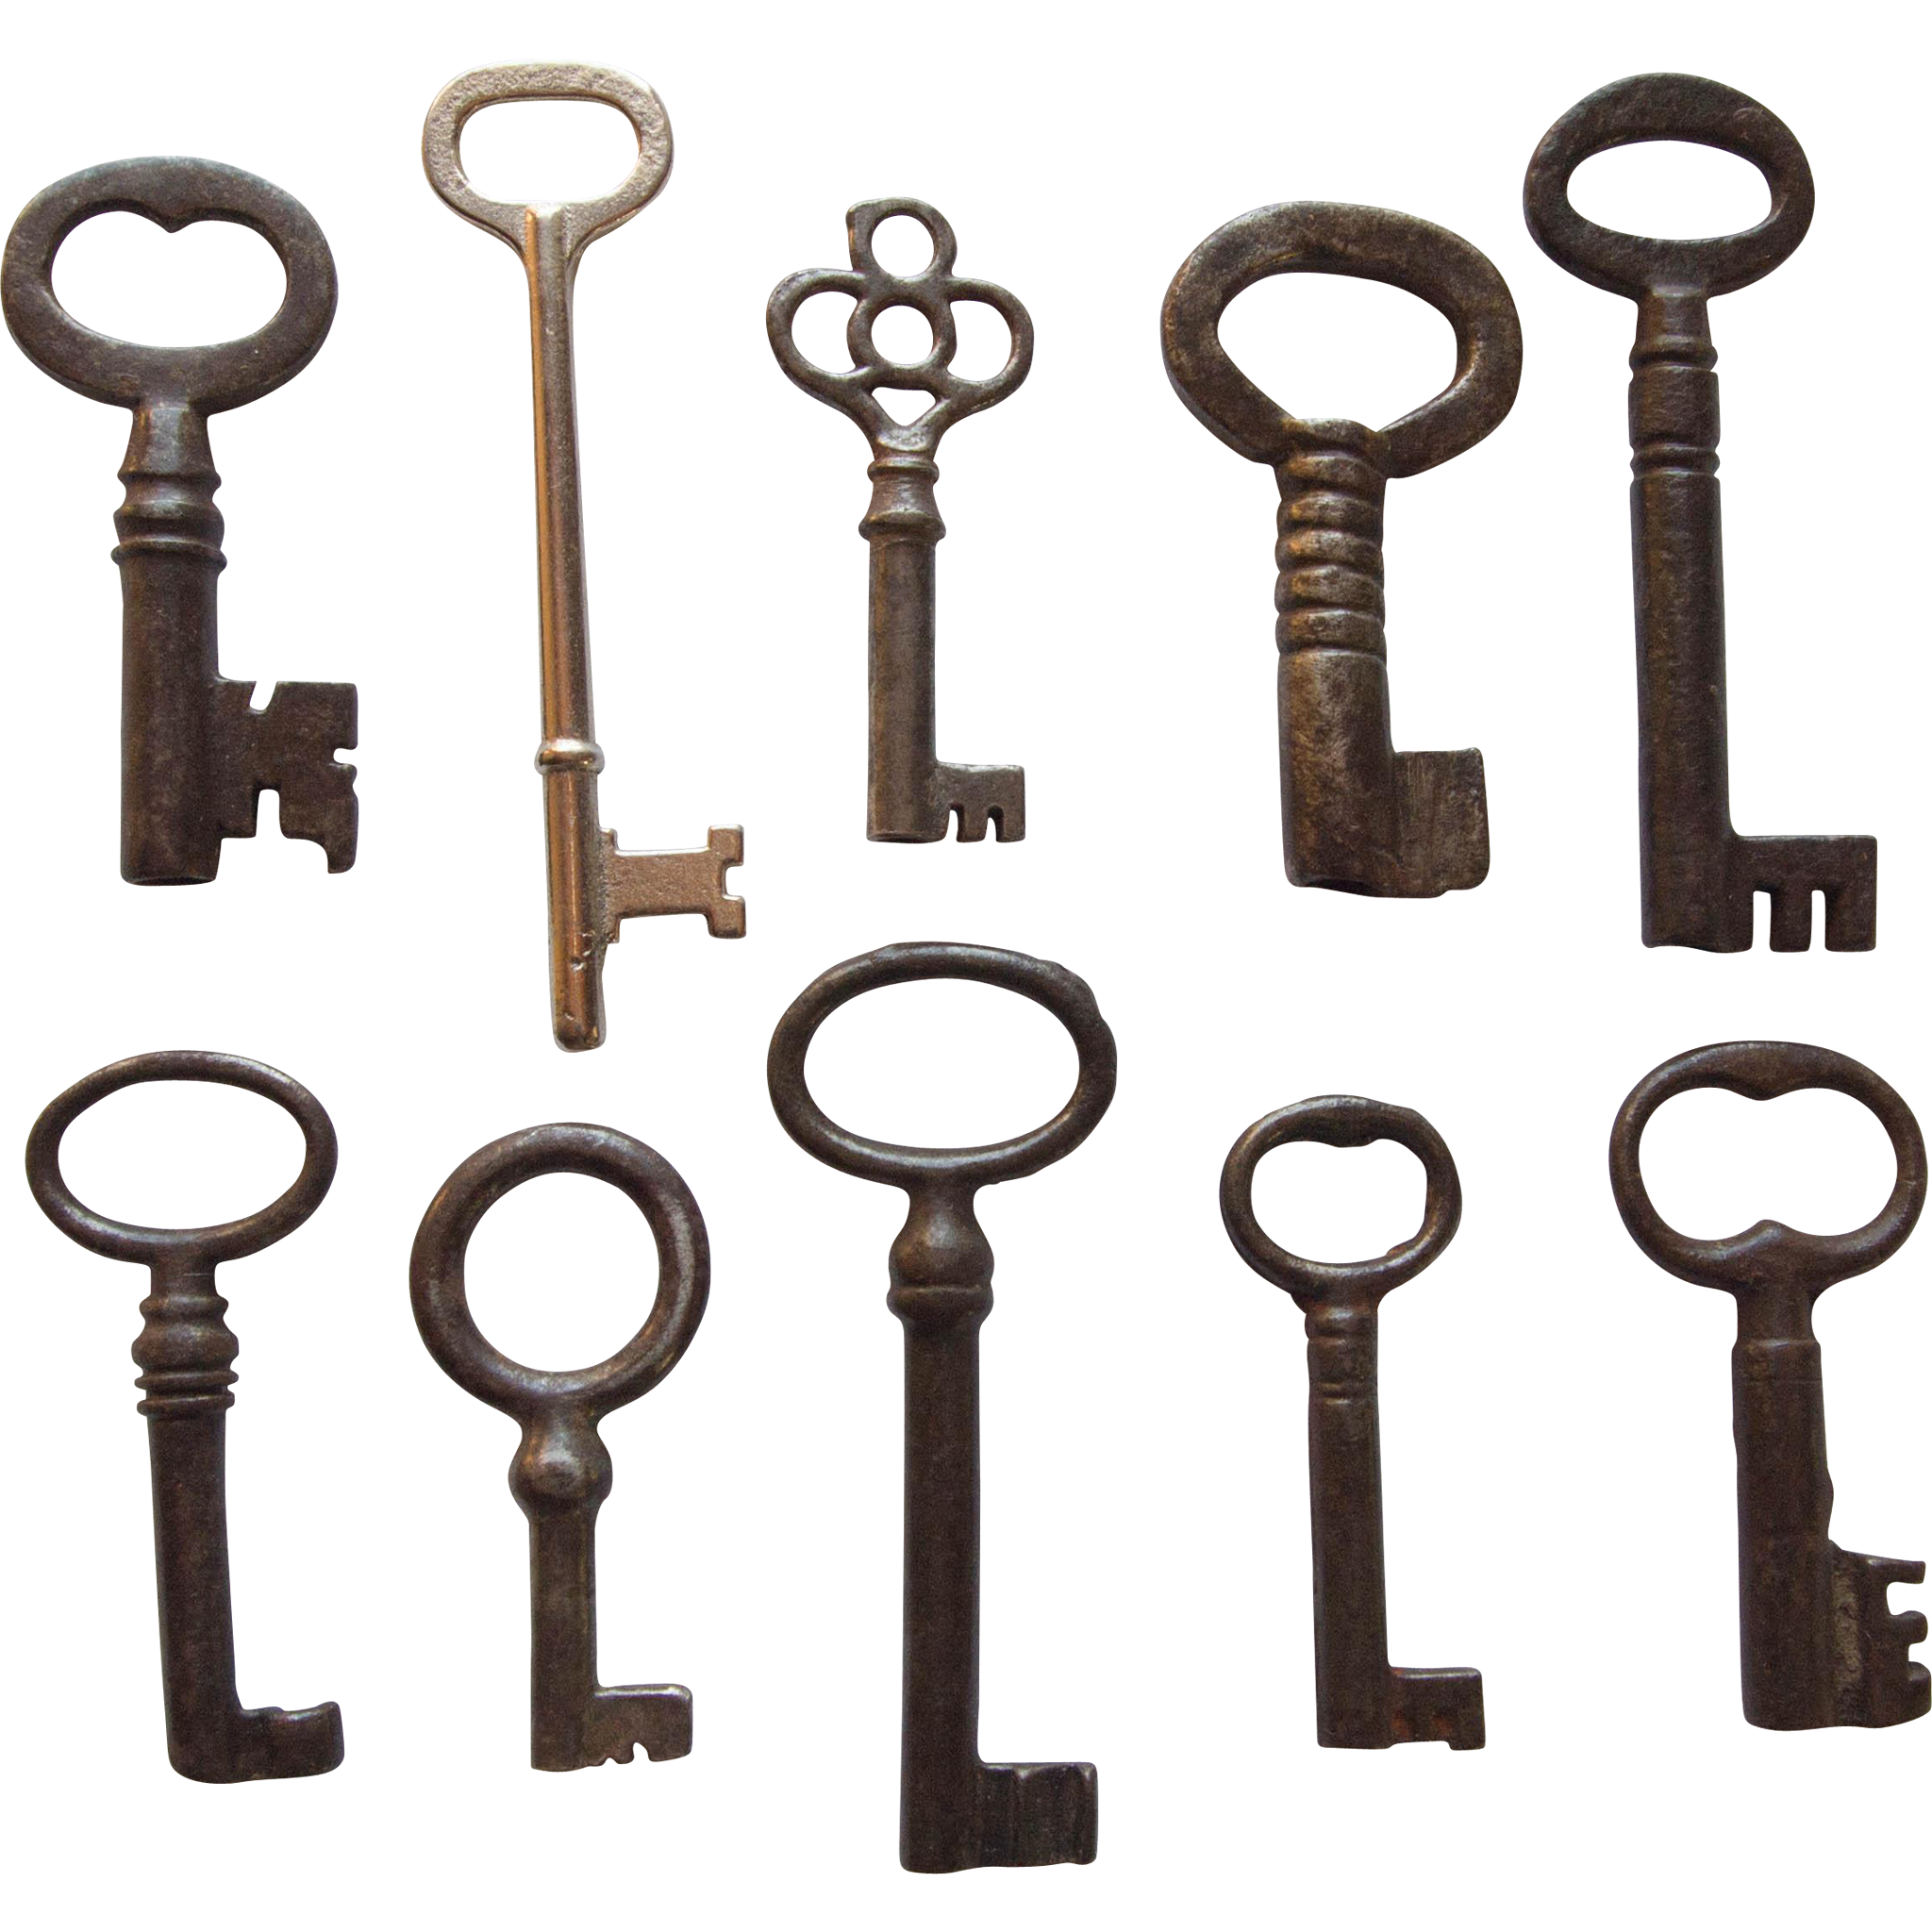 What is a skeleton key?